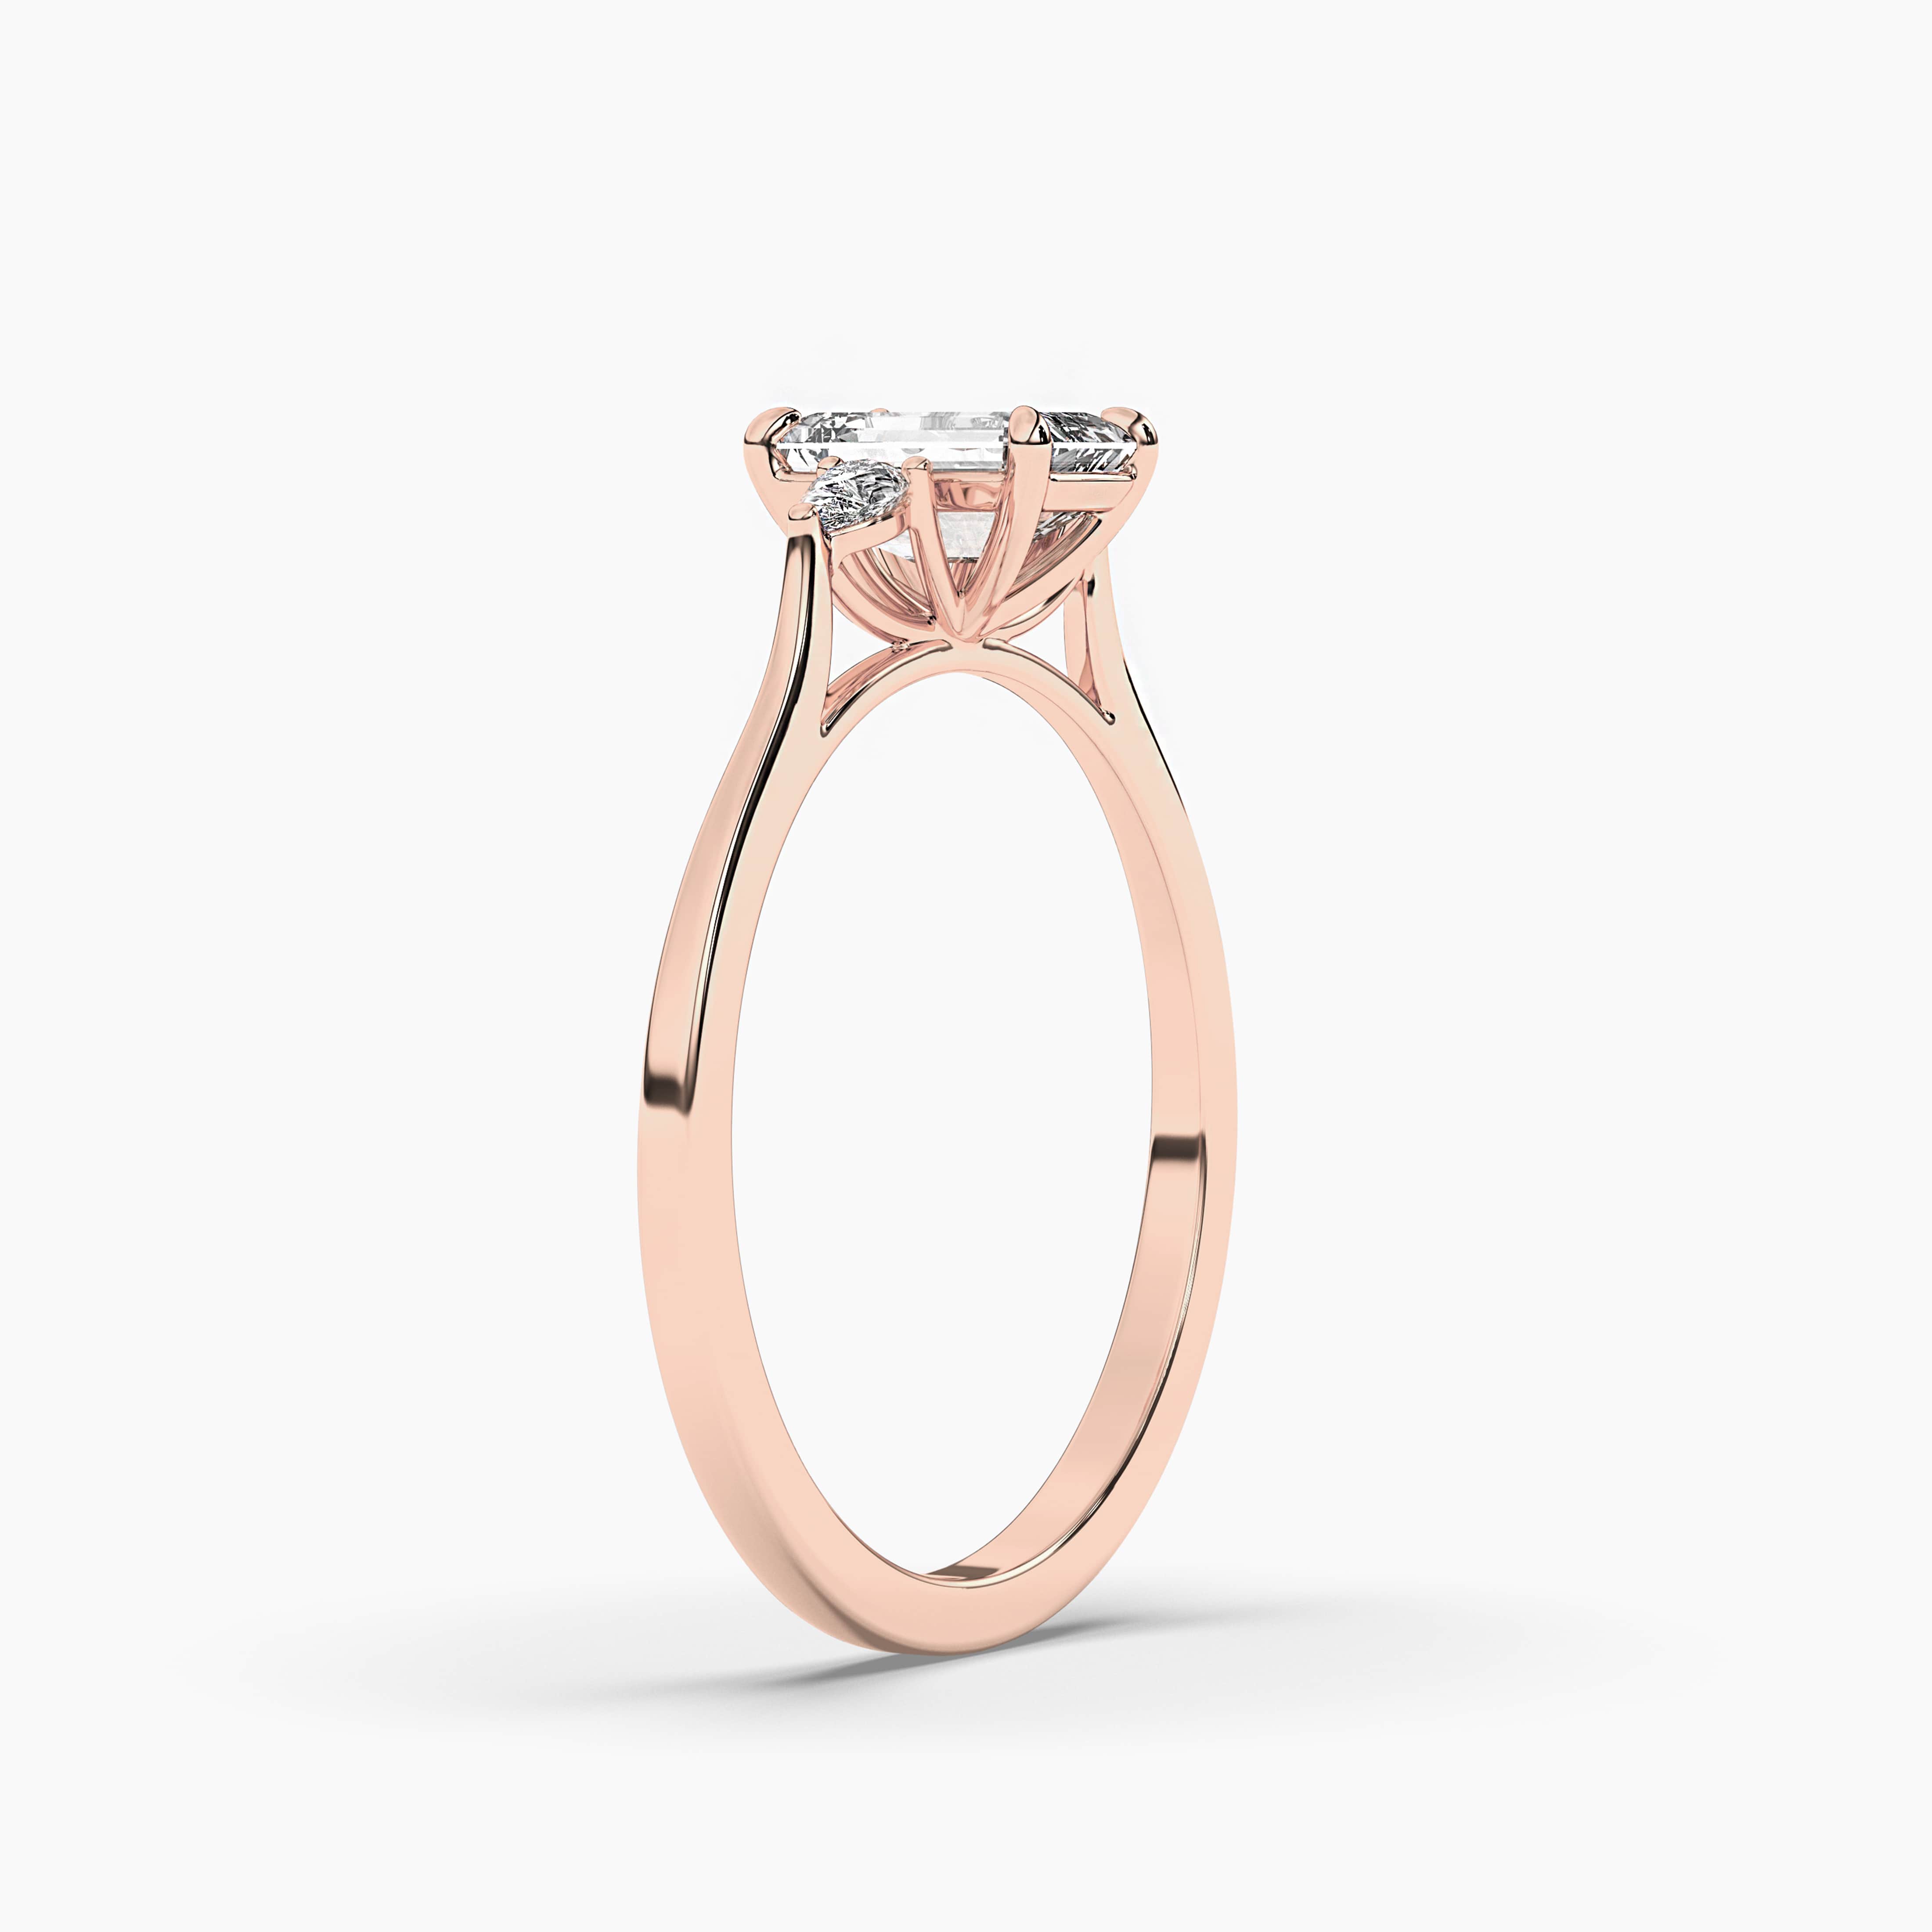 Emerald Cut Diamond Engagement Ring In Rose Gold